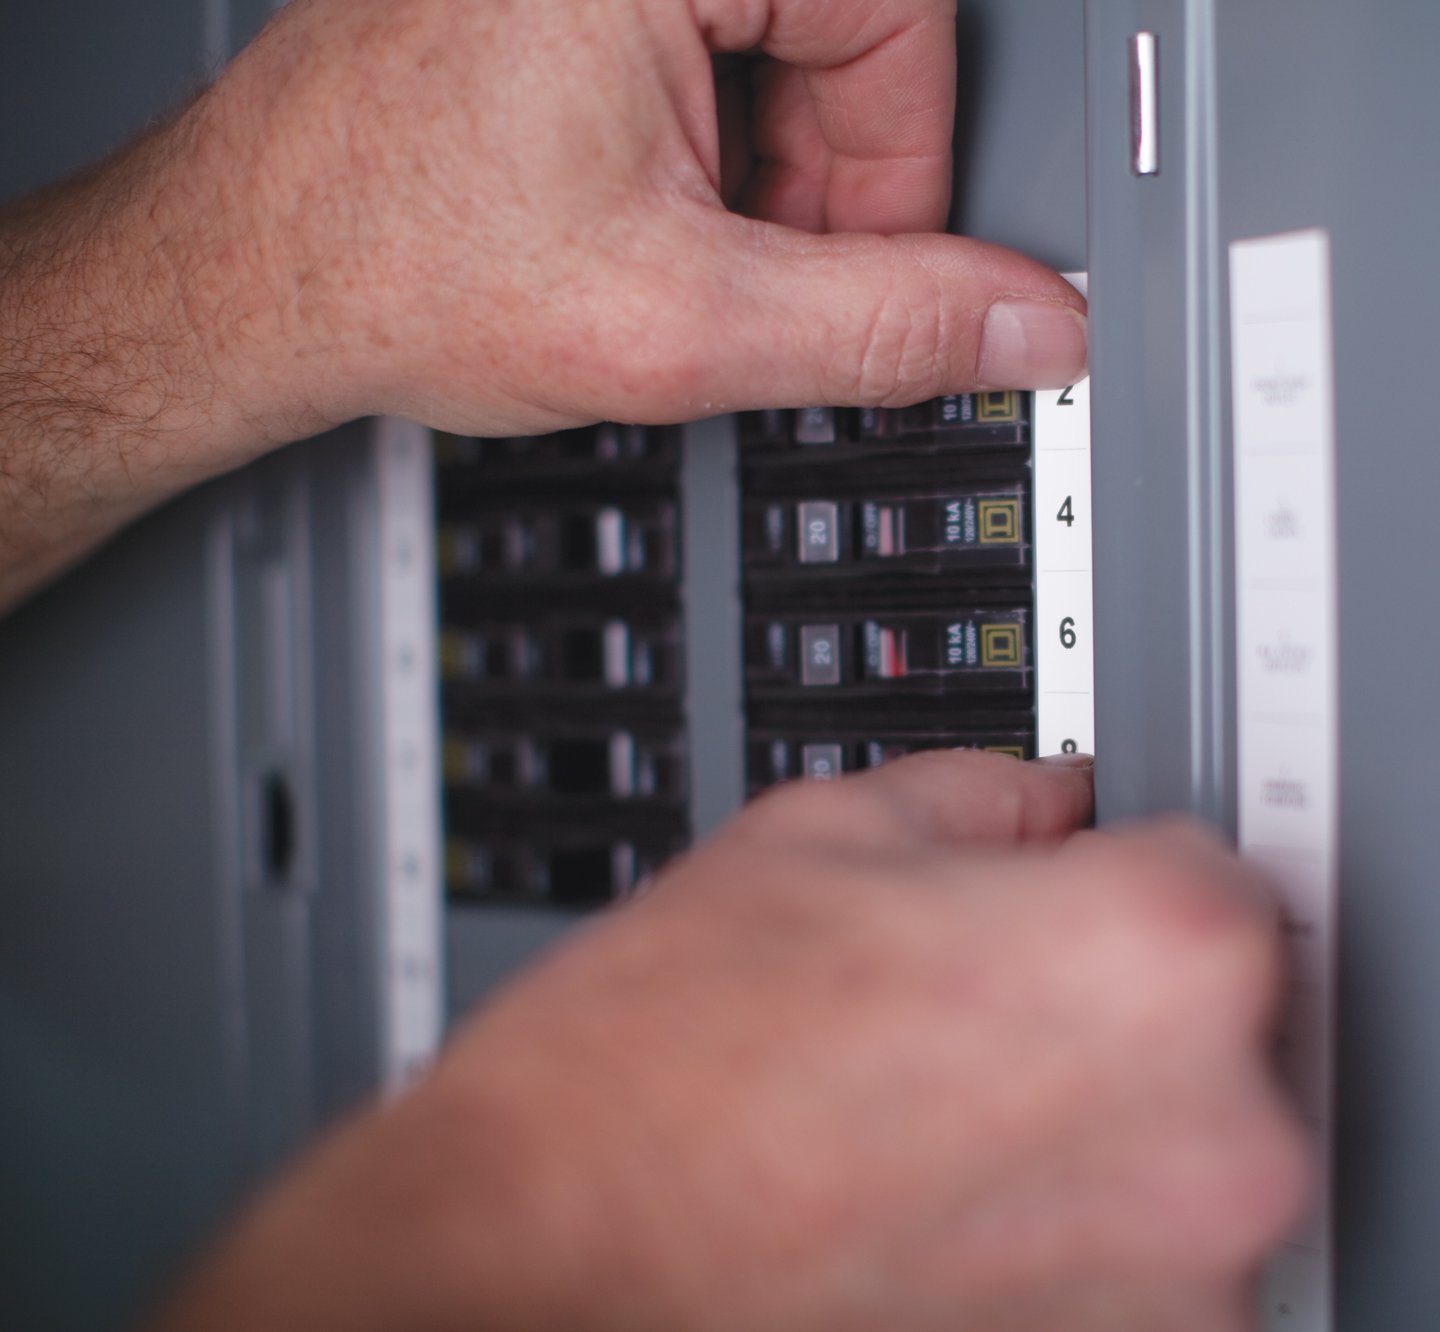 Hands placing a label on a fuse box.